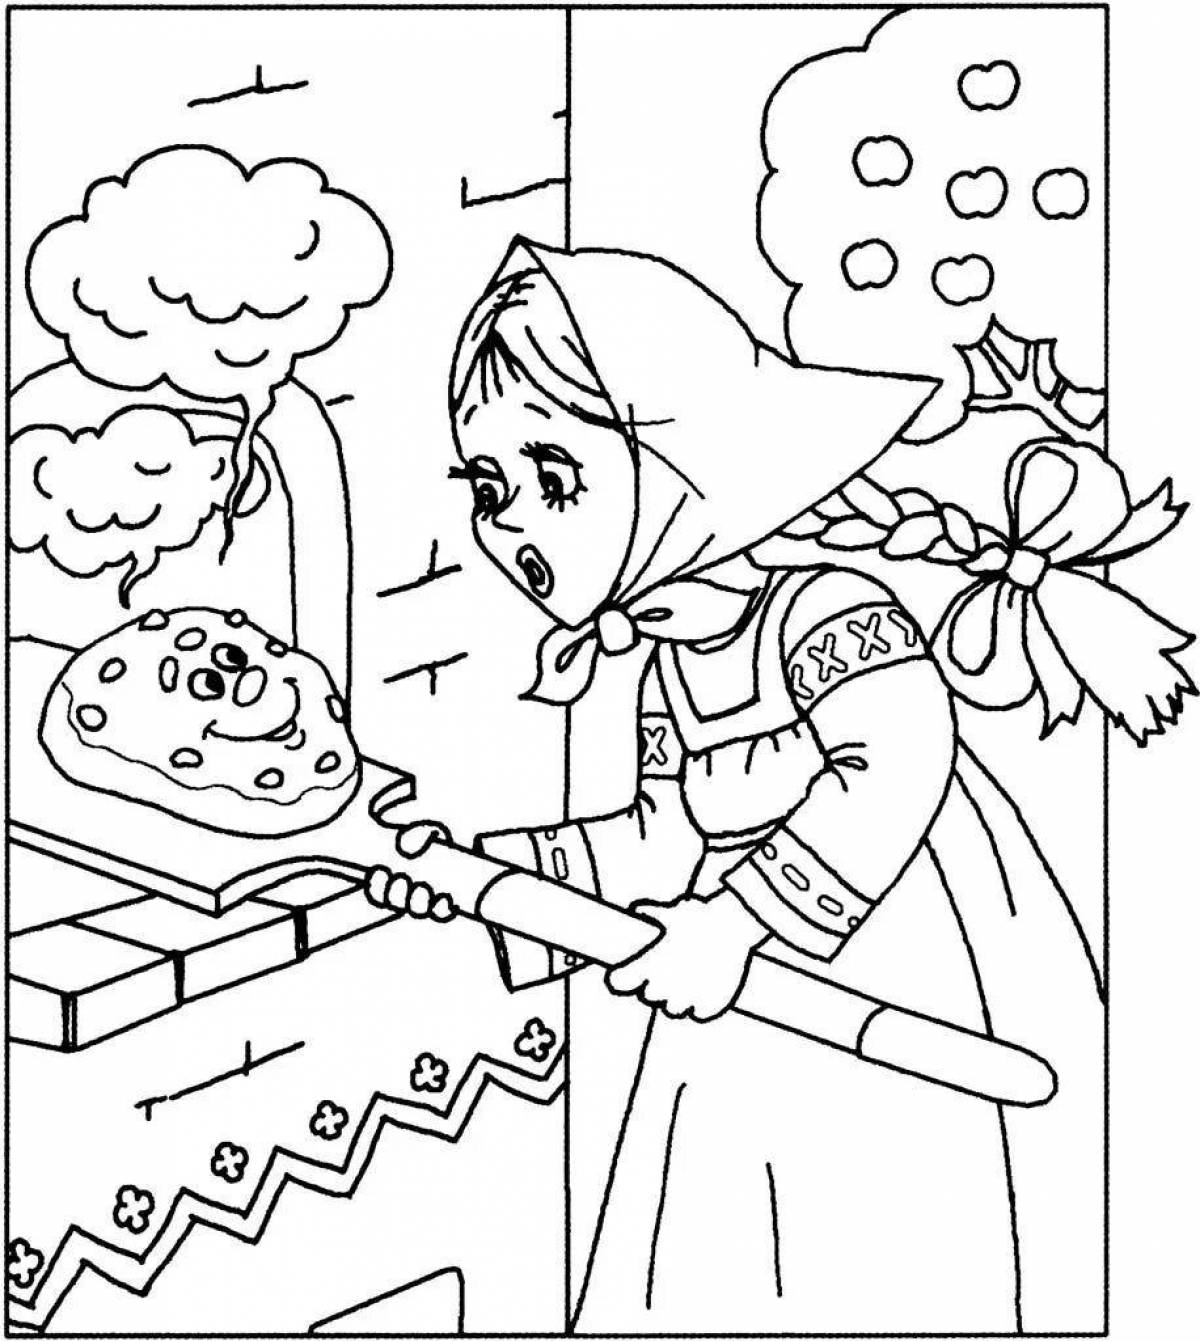 Cute coloring frost ivanovich needlewoman and sloth